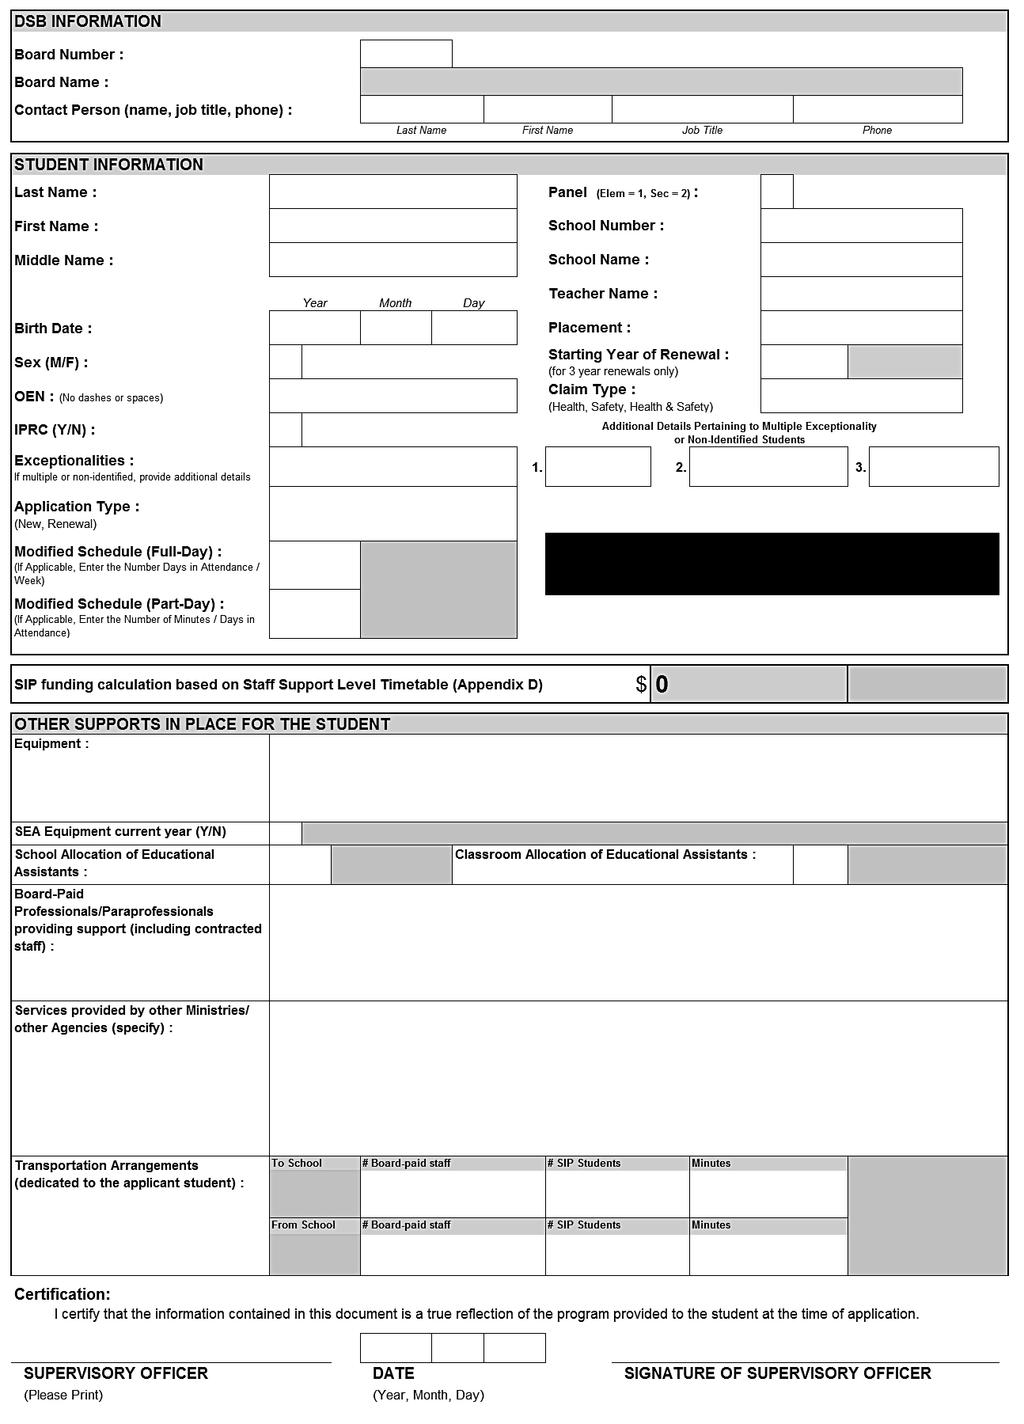 Appendix C : Special Incidence Portion (SIP) Application Form Note: An electronic